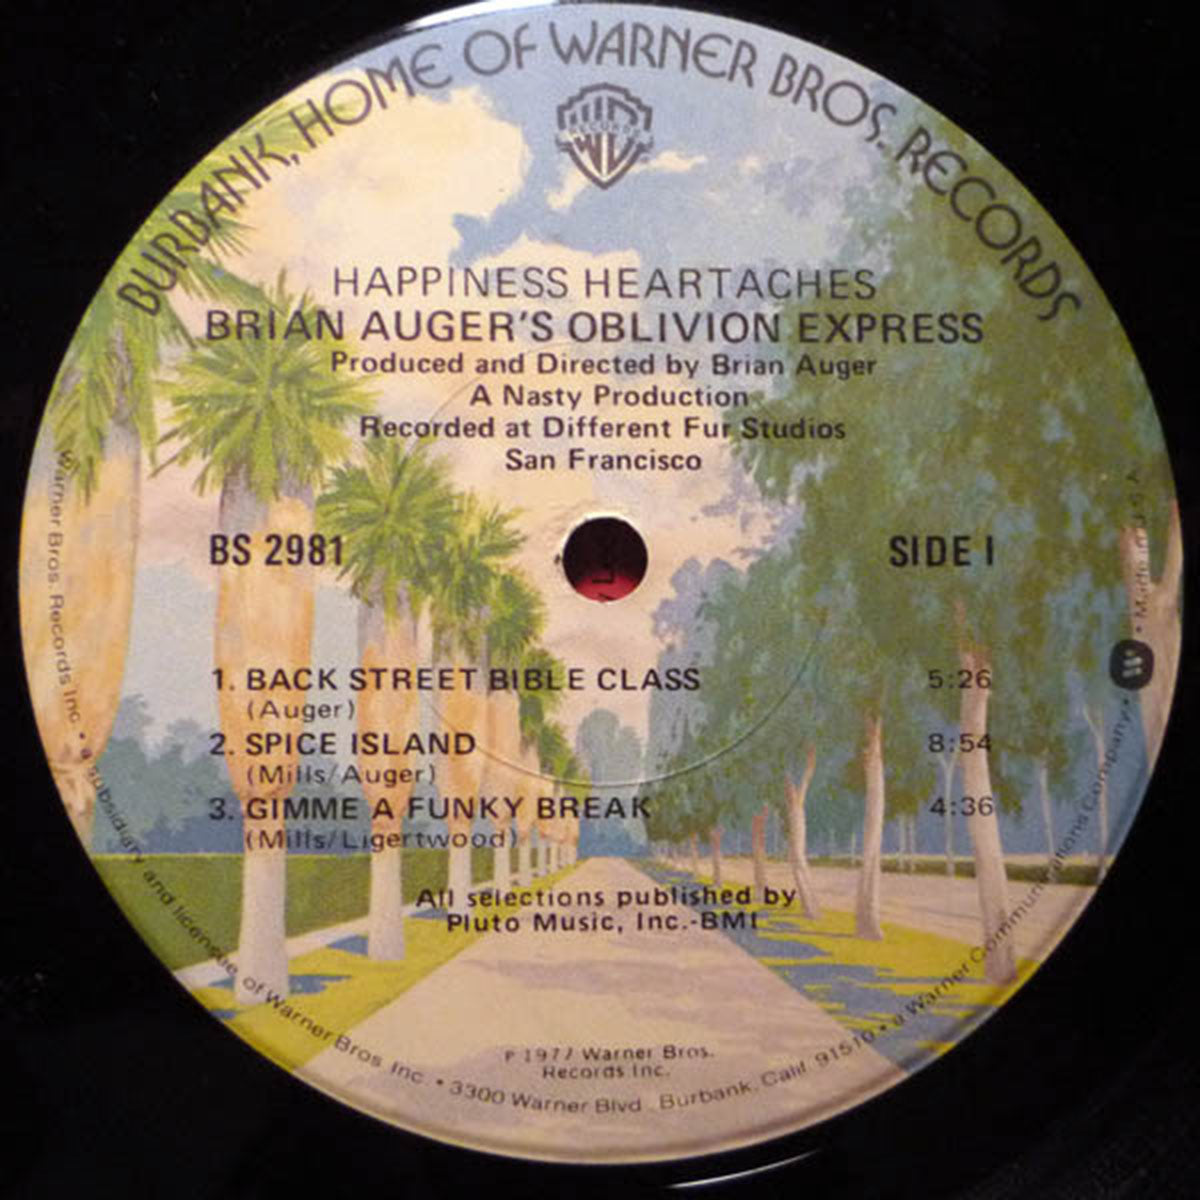 Brian Auger's Oblivion Express – Happiness Heartaches - US Pressing